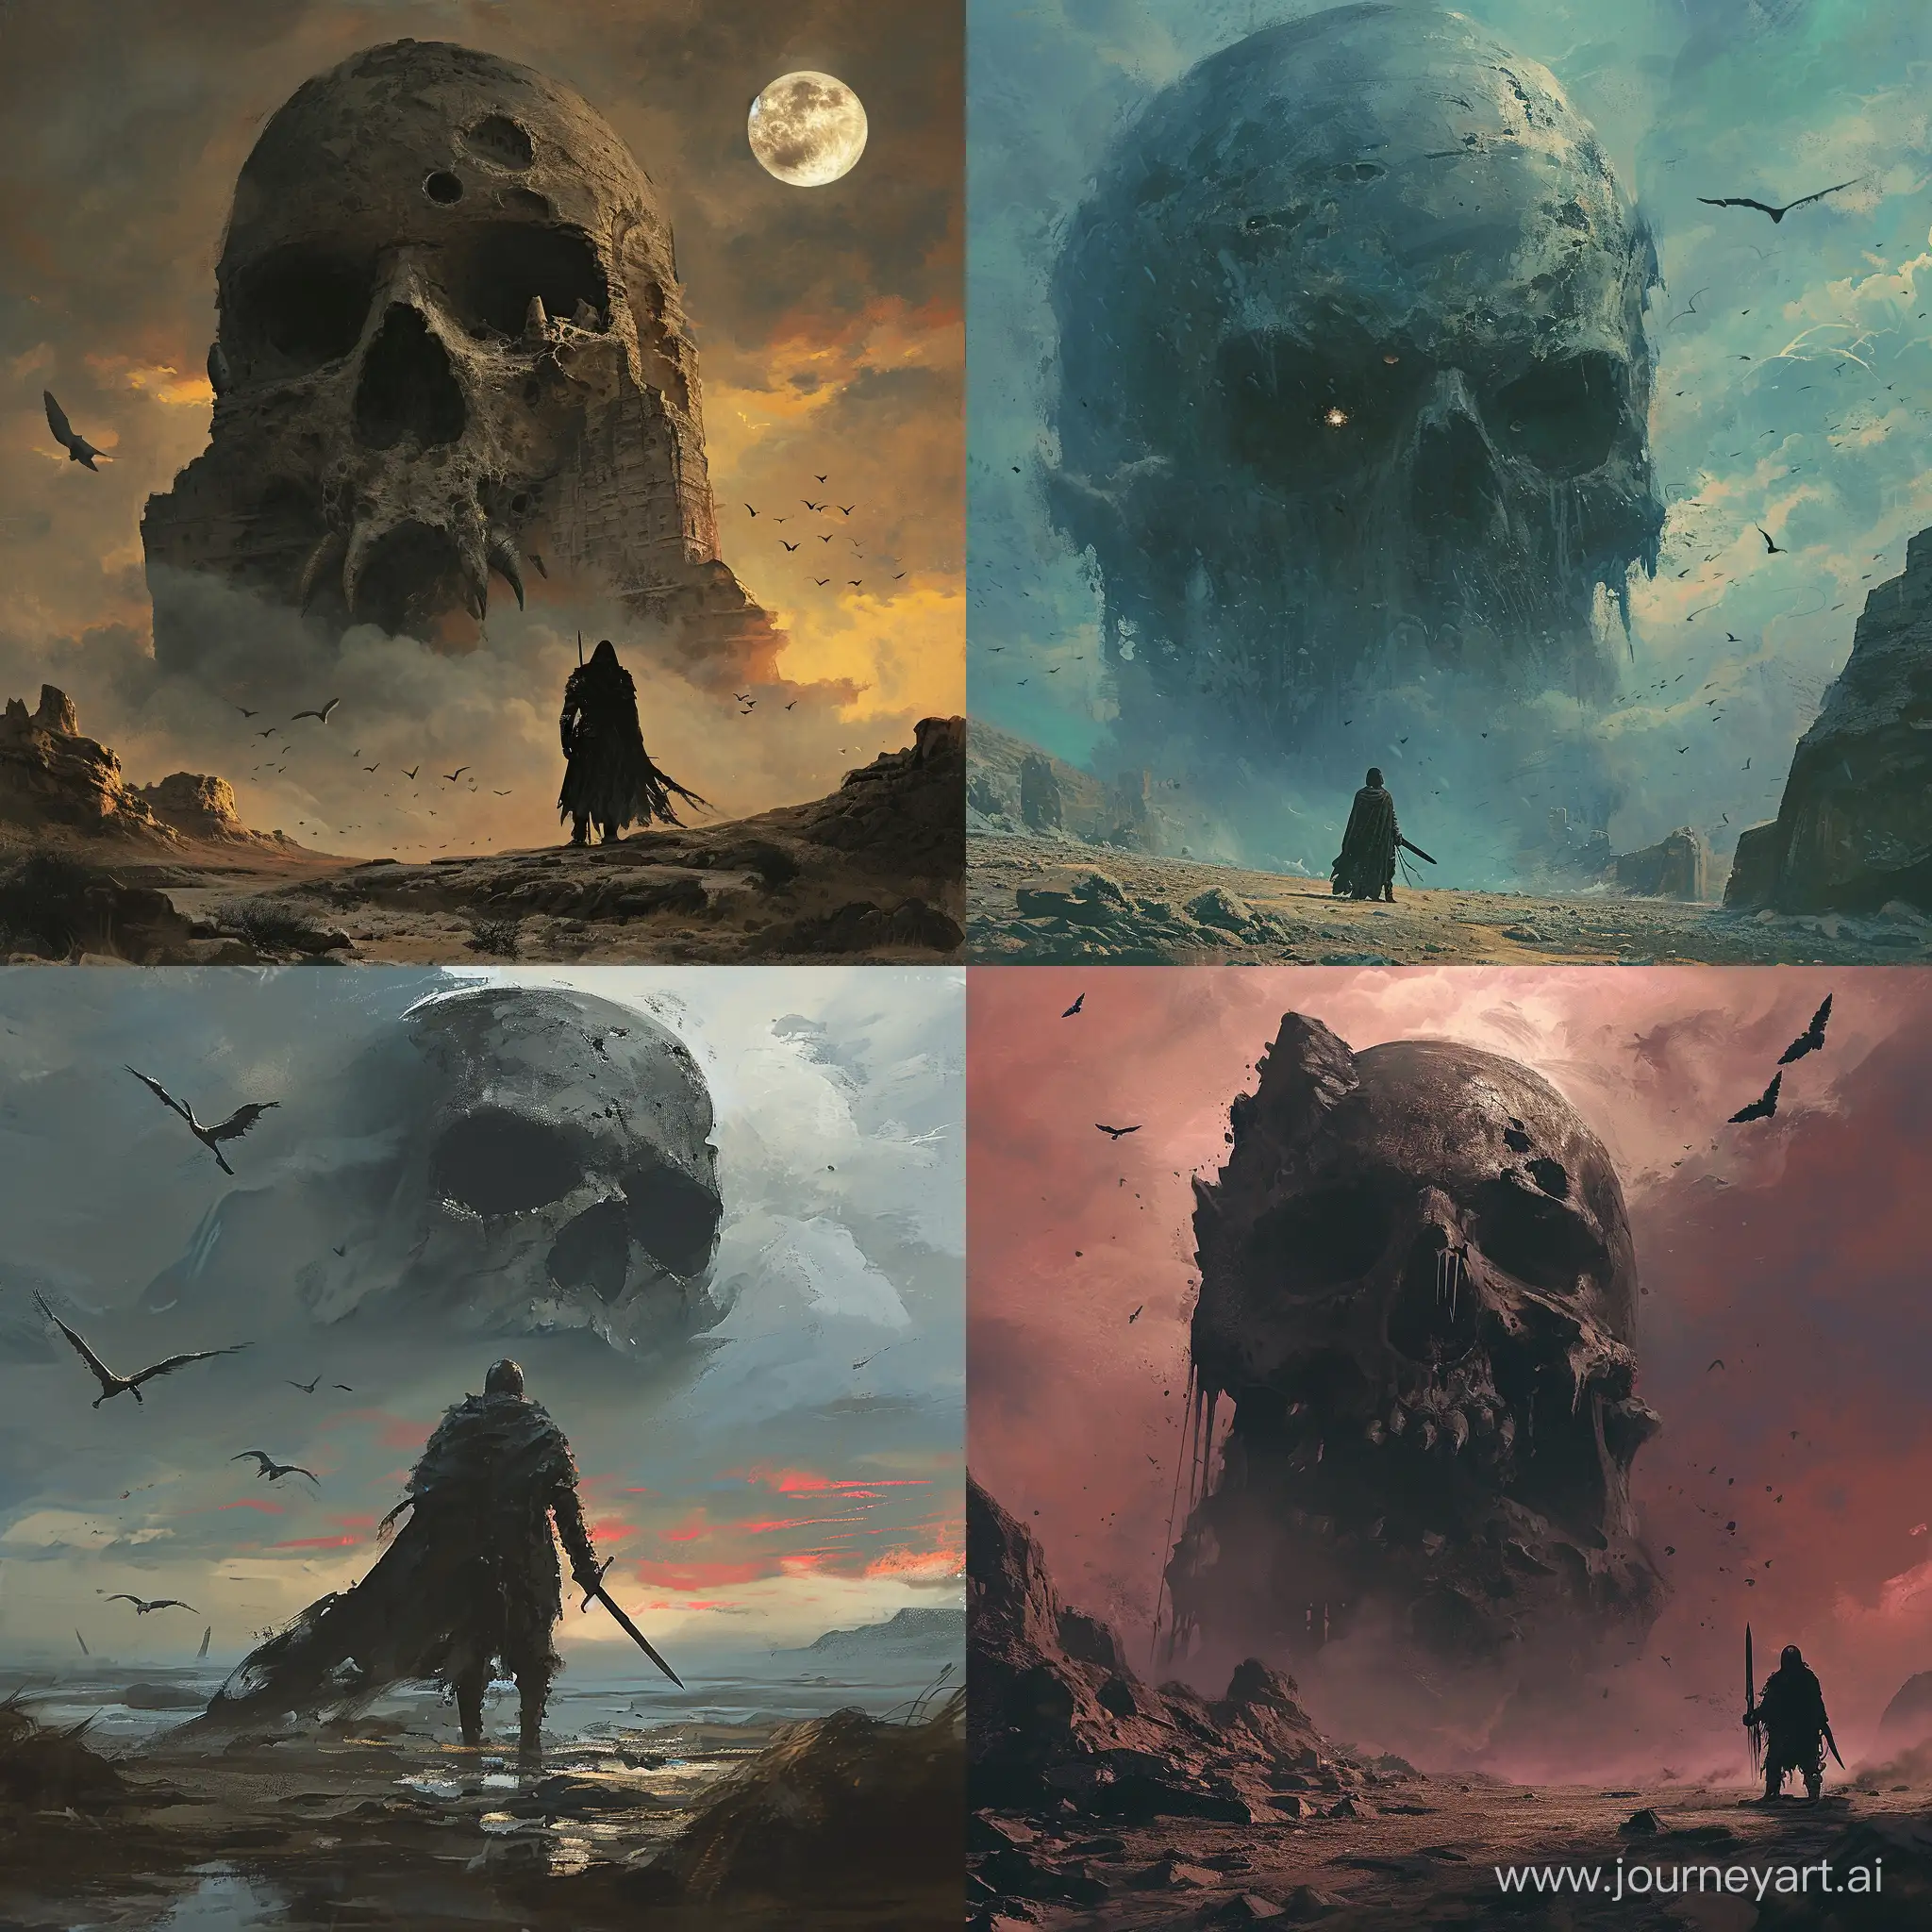 Illustration, ::1.5. a warrior stands in a desolate land with a giant skull looming above them. The warrior is equipped with a sword and shield, there is a skull with glowing eyes in the background. The scene is set at dusk, there are crows flying around. --v 6